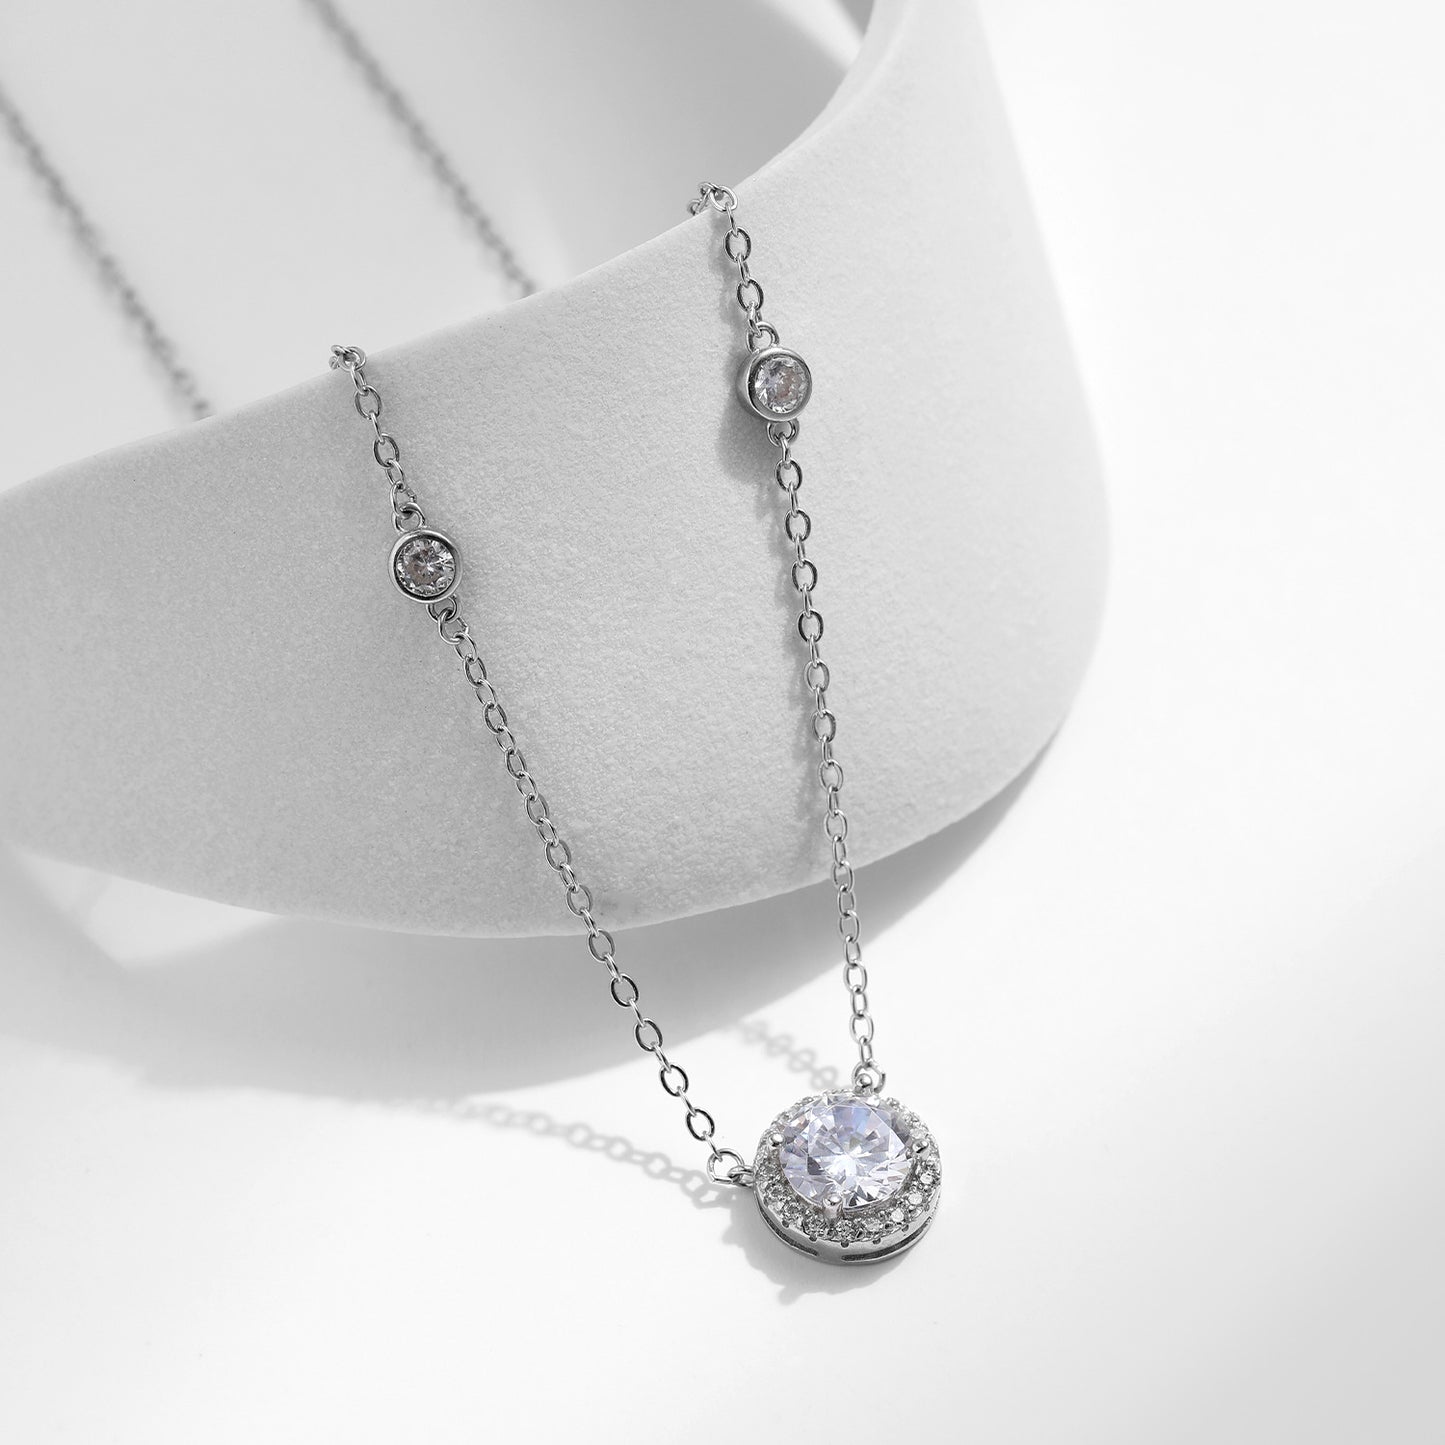 Luxurious Sterling Silver Necklace with Zircon Pendant and Unique Design